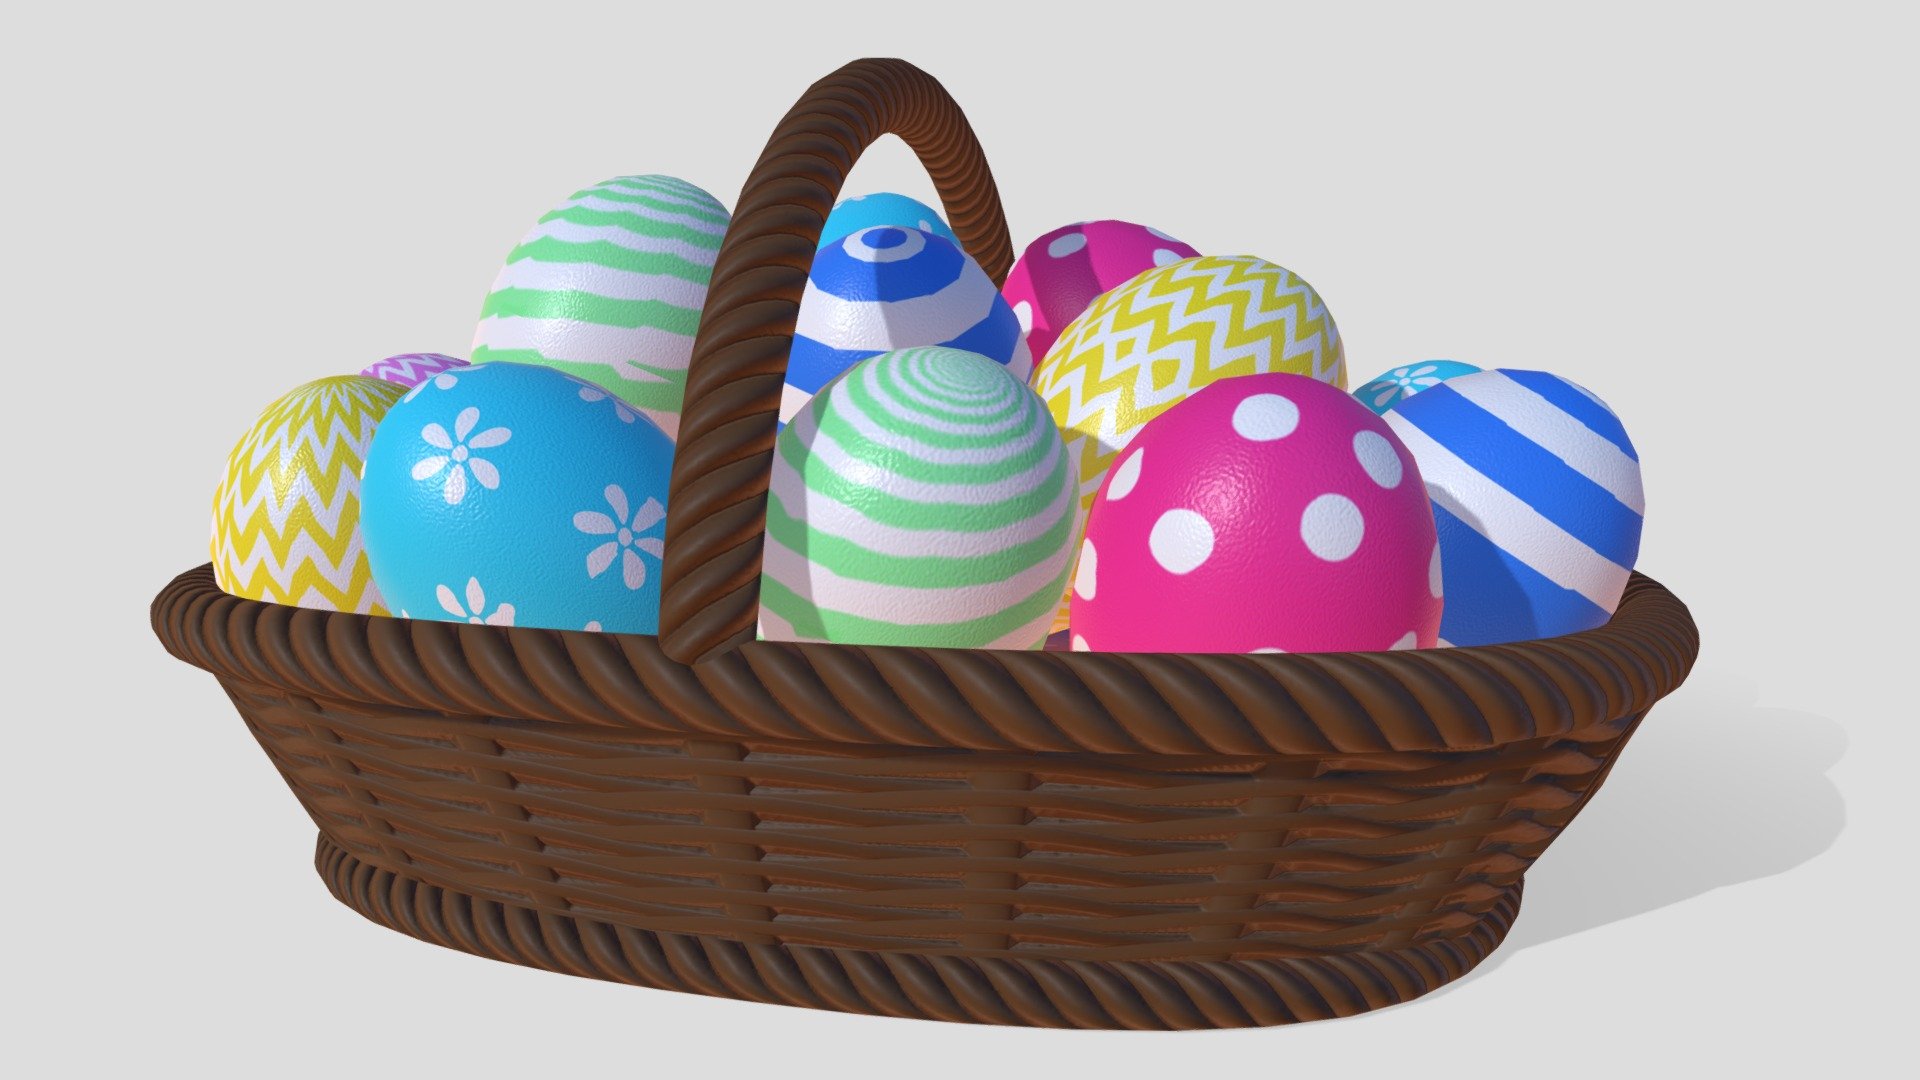 Basket of colourful Easter eggs with an assortment of design patterns

Login to STB’s Tourism Information &amp; Services Hub for free downloads:
https://tih.stb.gov.sg/content/tih/en/marketing-and-media-assets/digital-images-andvideoslisting/digital-images-and-videos-detail.104ffe5df0bcf8840078cb6c6153653c20e.Easter+Eggs.html - Easter Eggs - 3D model by STB-TC 3d model